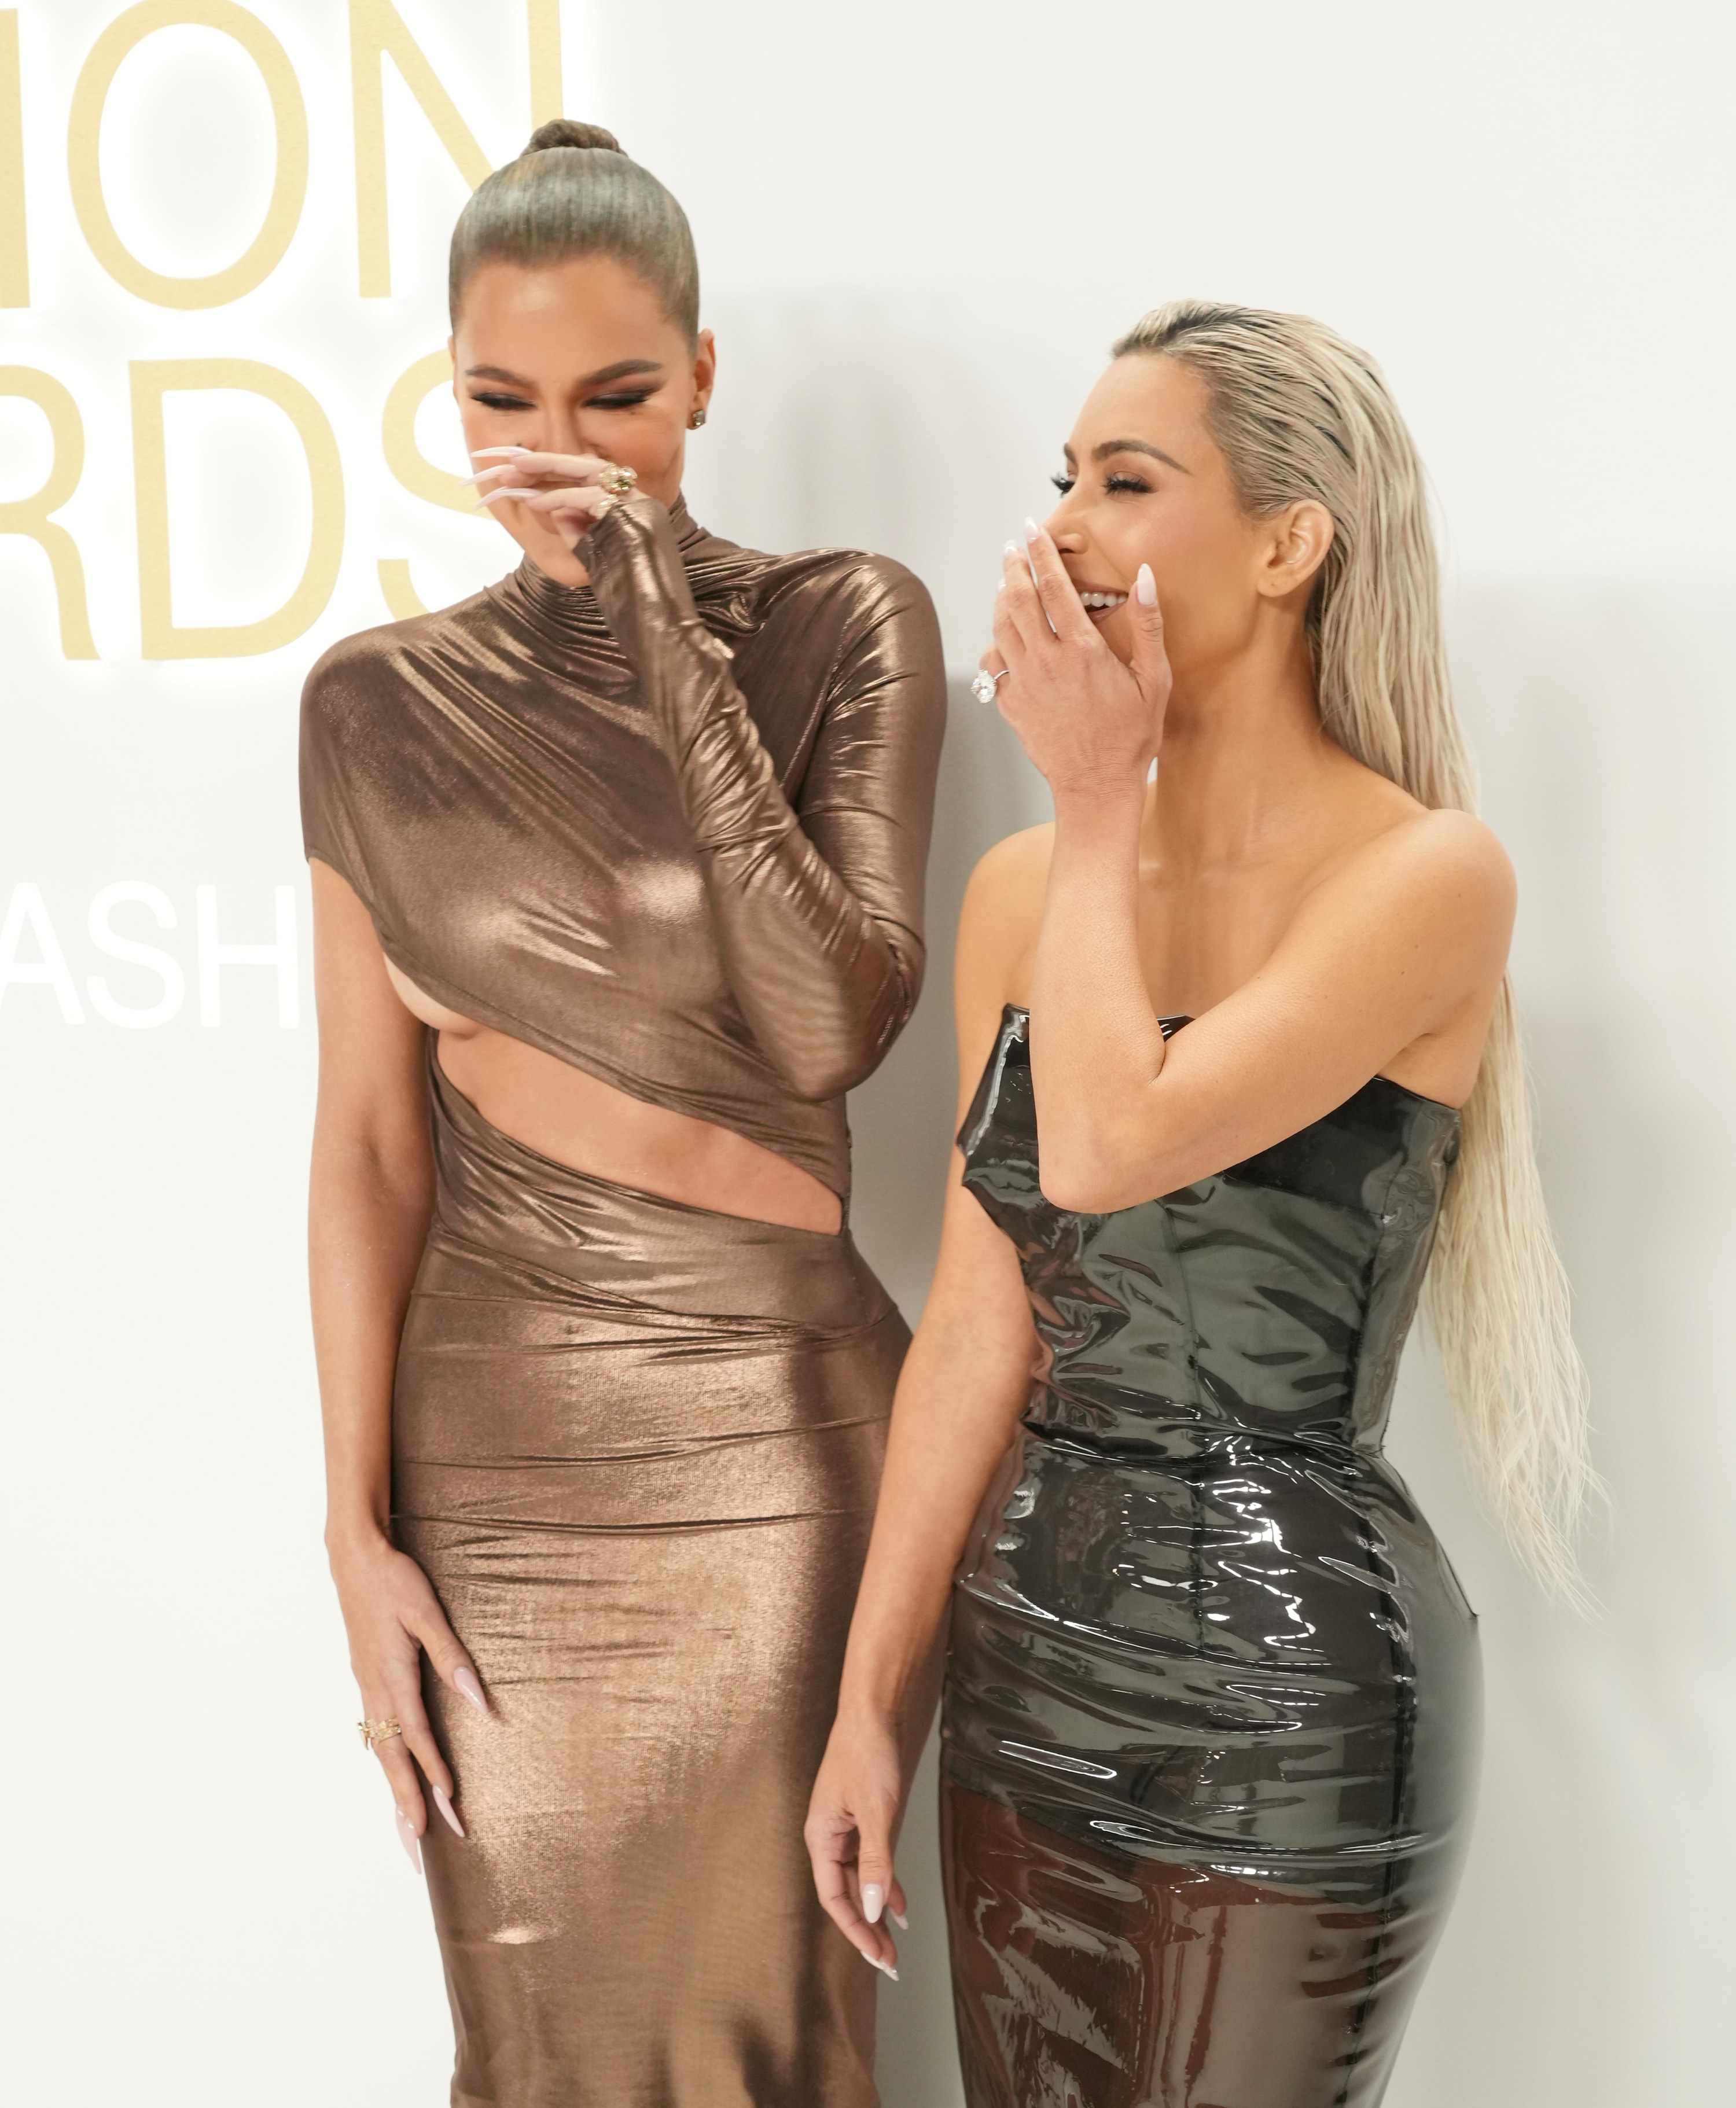 Khloé and Kim laughing